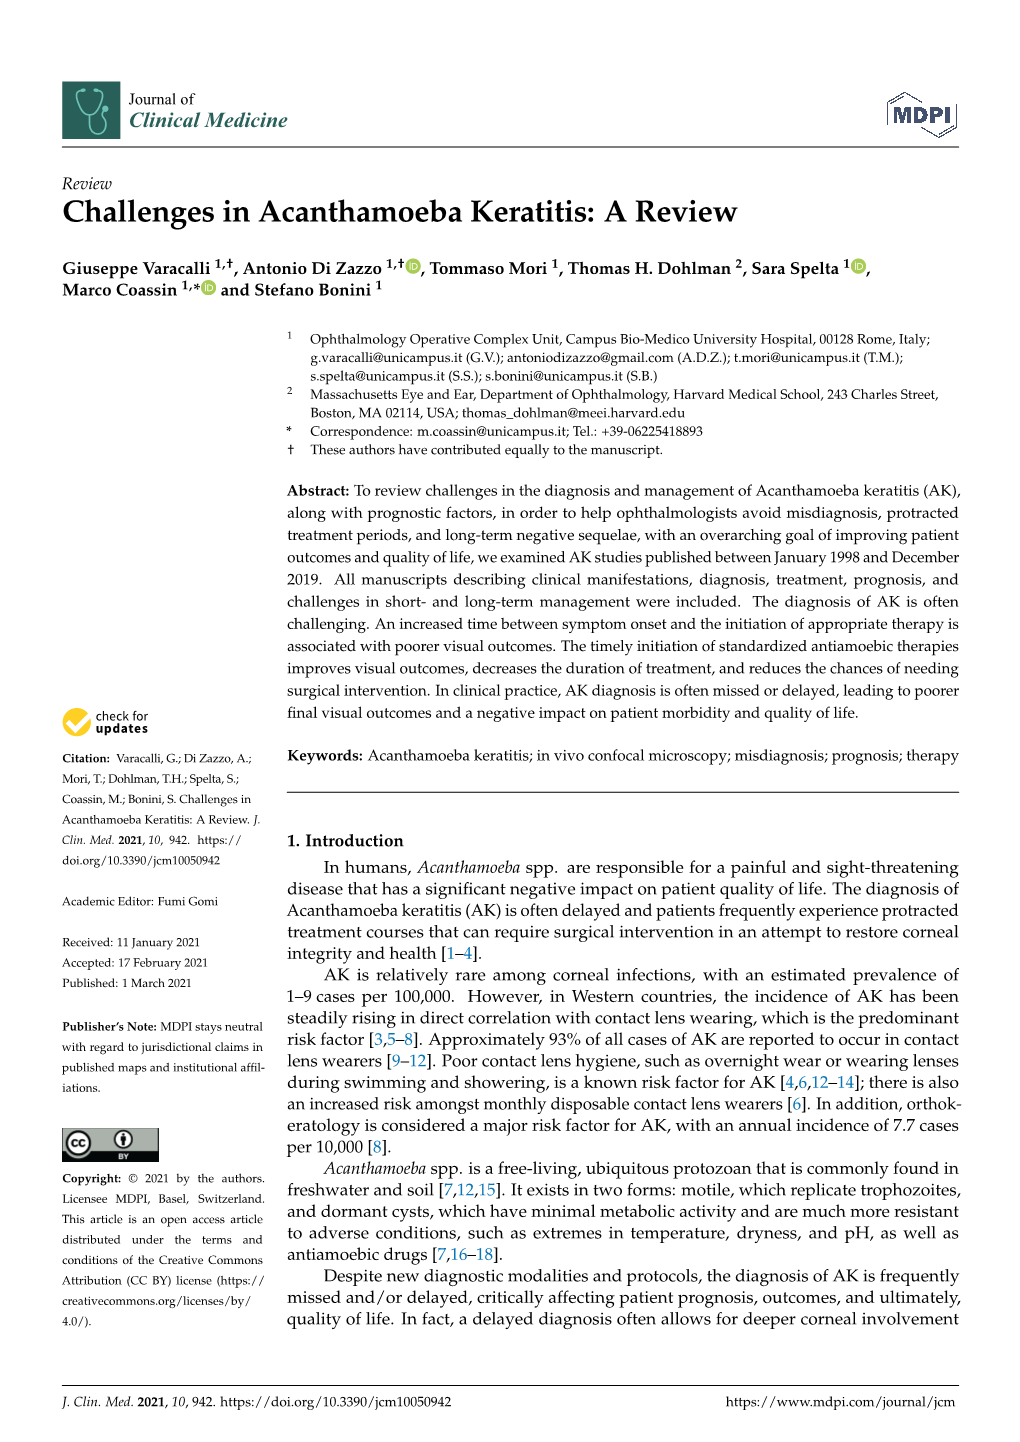 Challenges in Acanthamoeba Keratitis: a Review